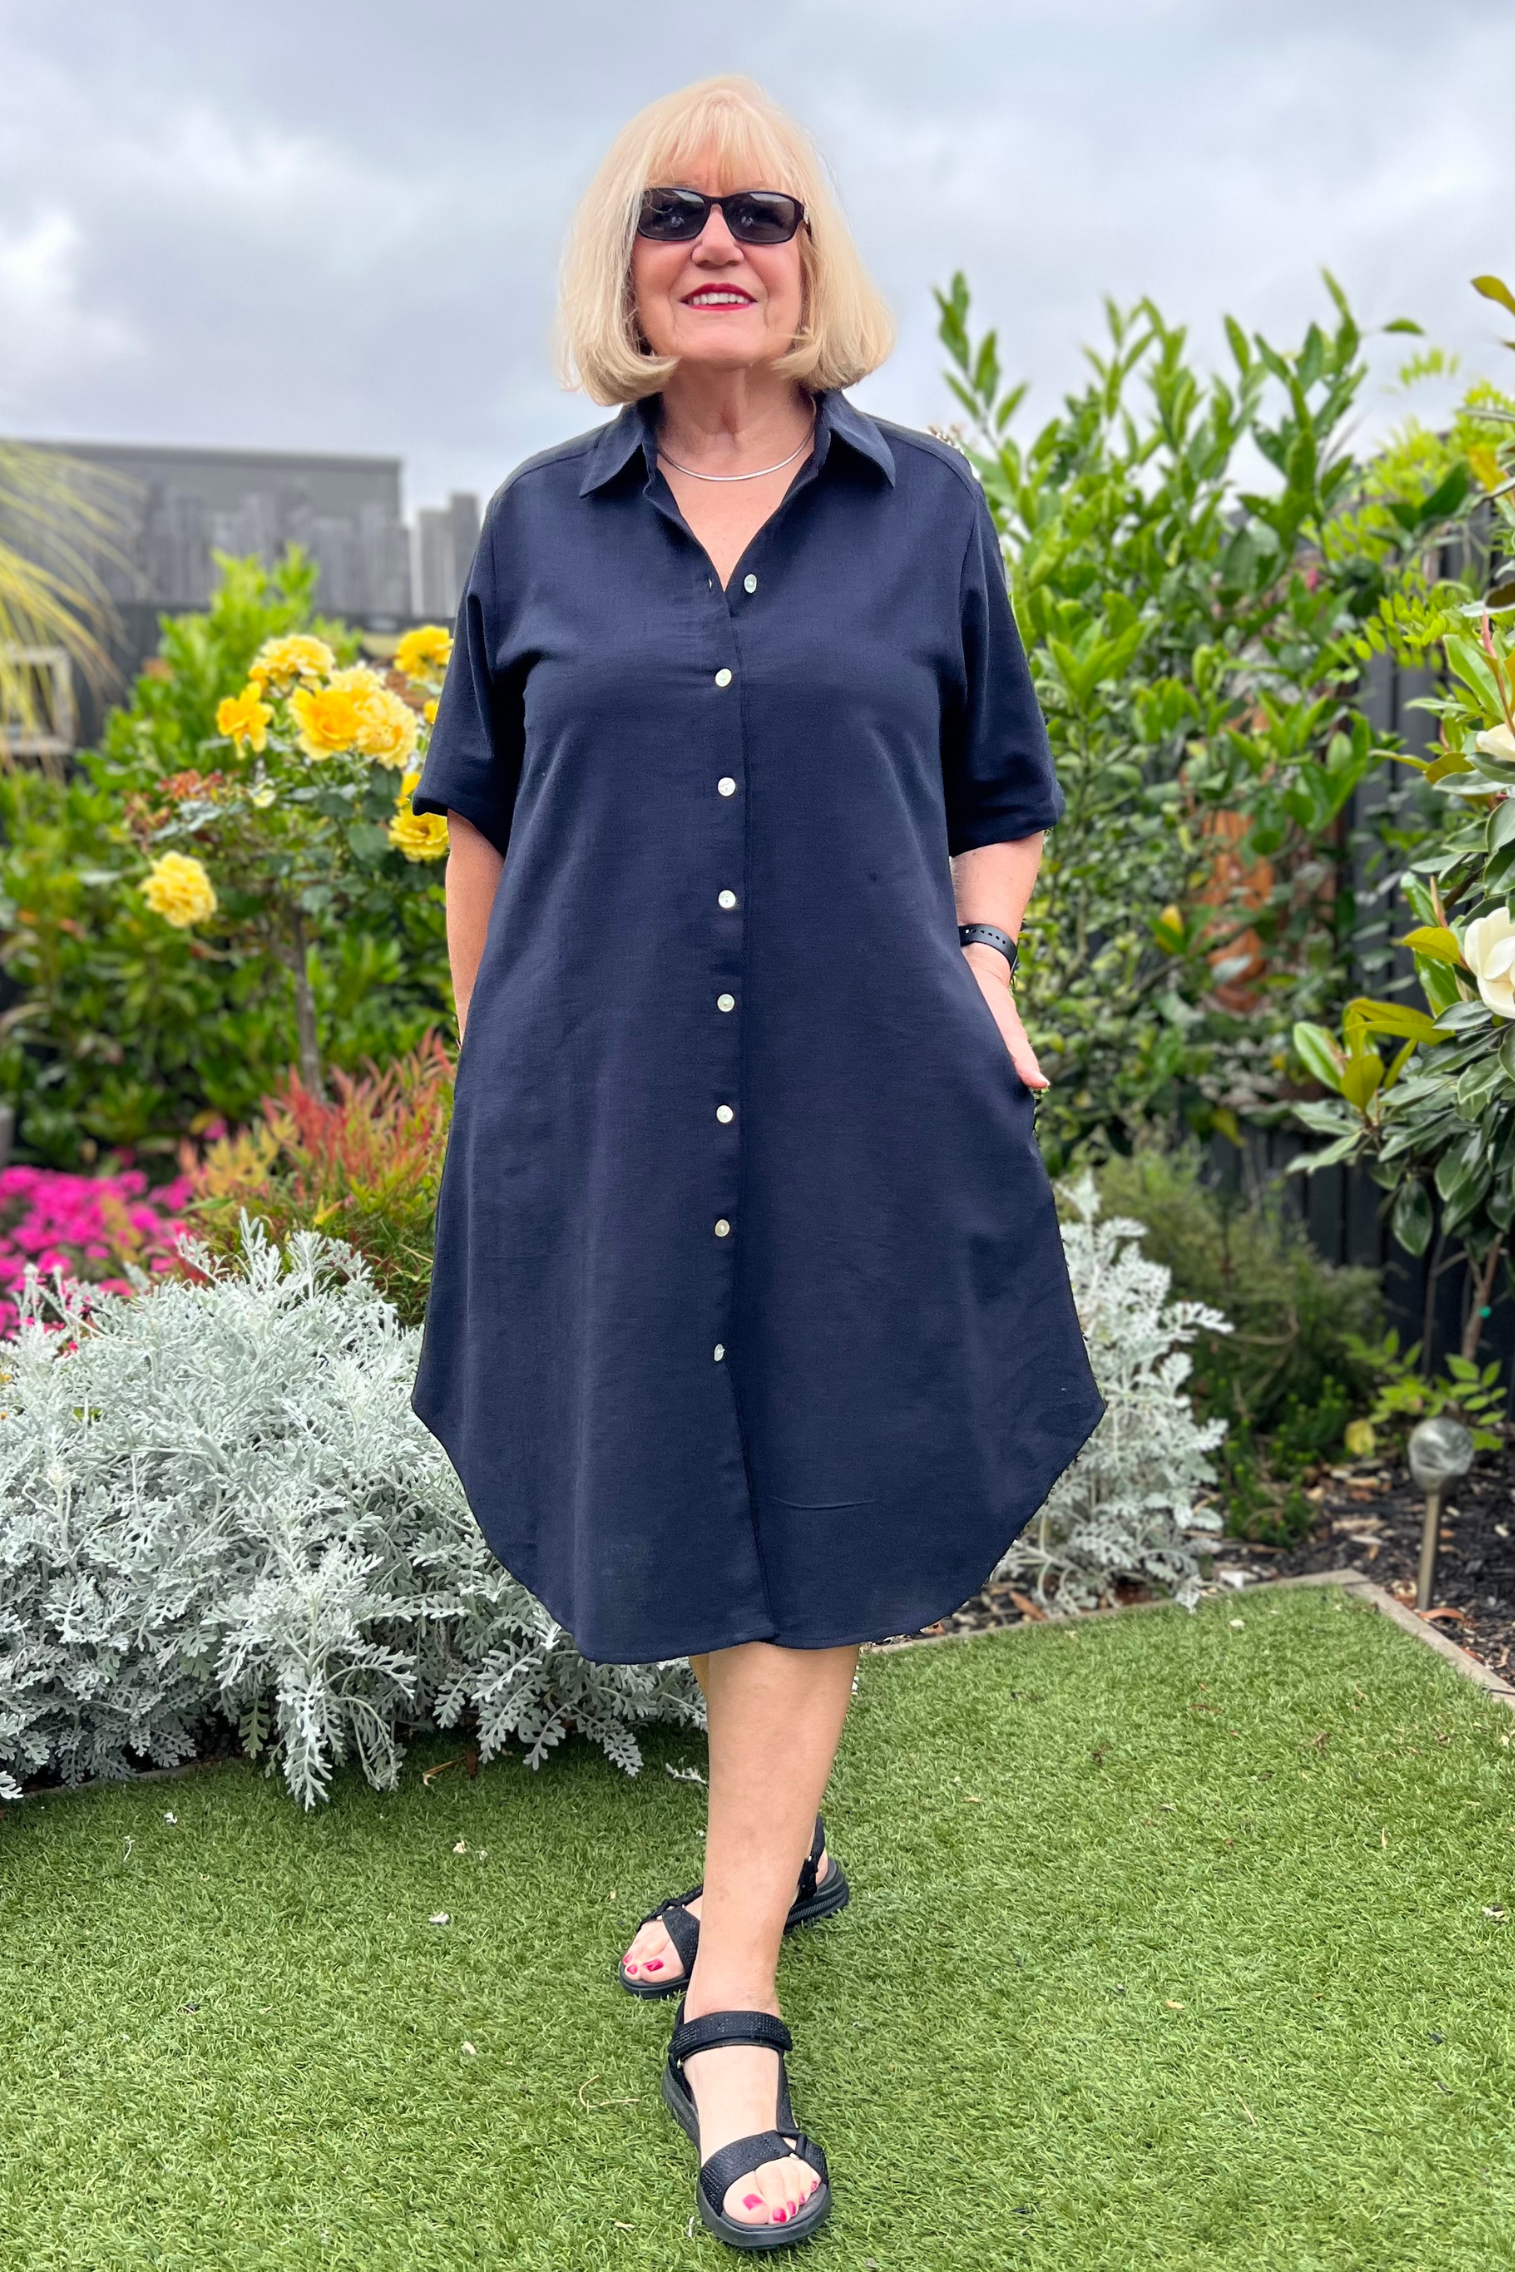 Kita Ku modelling the shirt dress pronto in solid black cotton and has shell buttons throughout, set in a sunny garden.